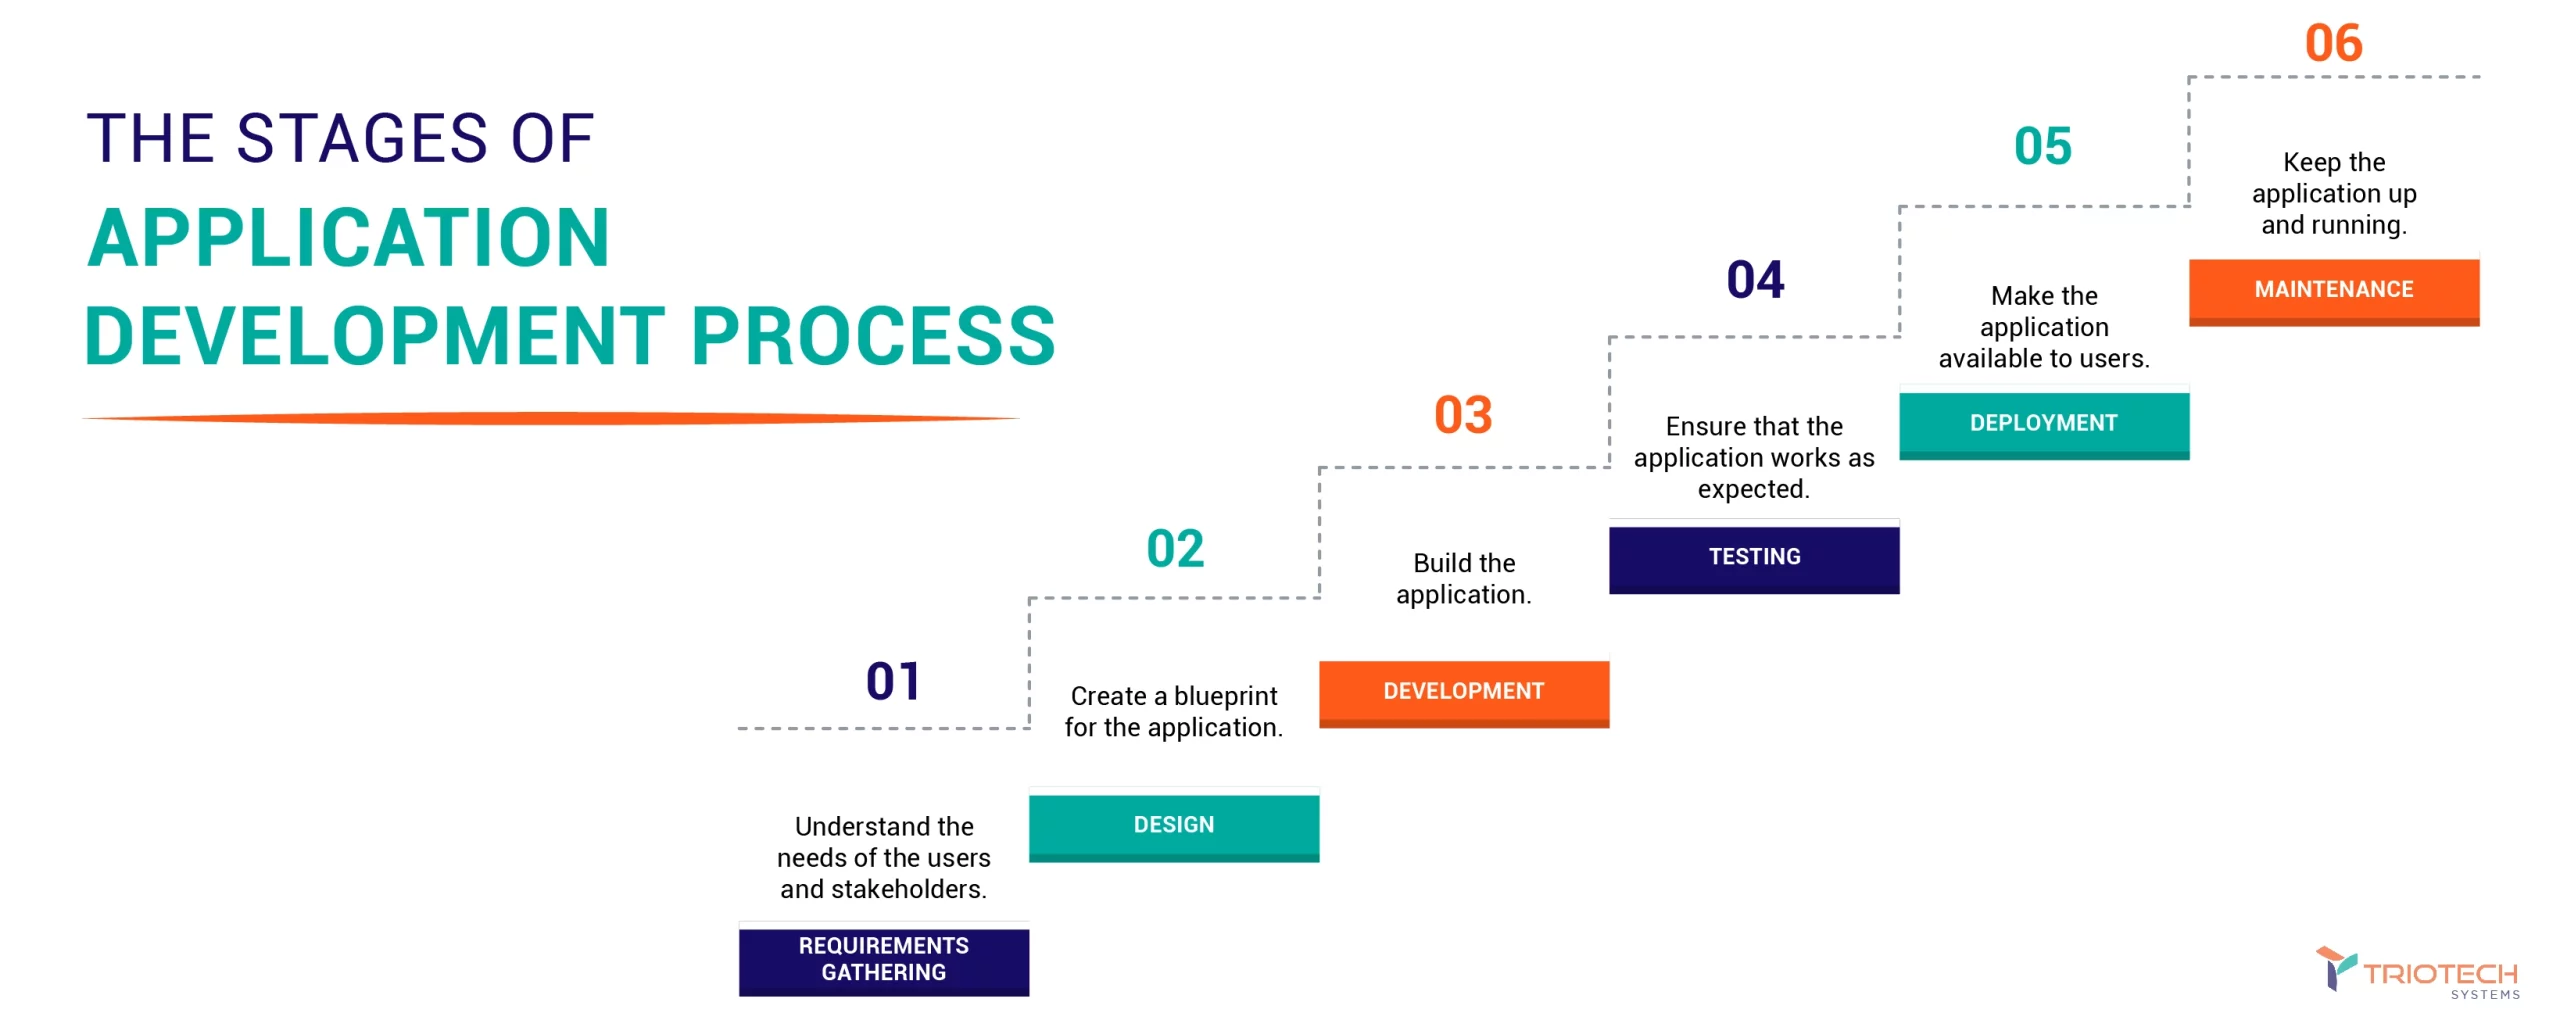 The Stages of Application Development process